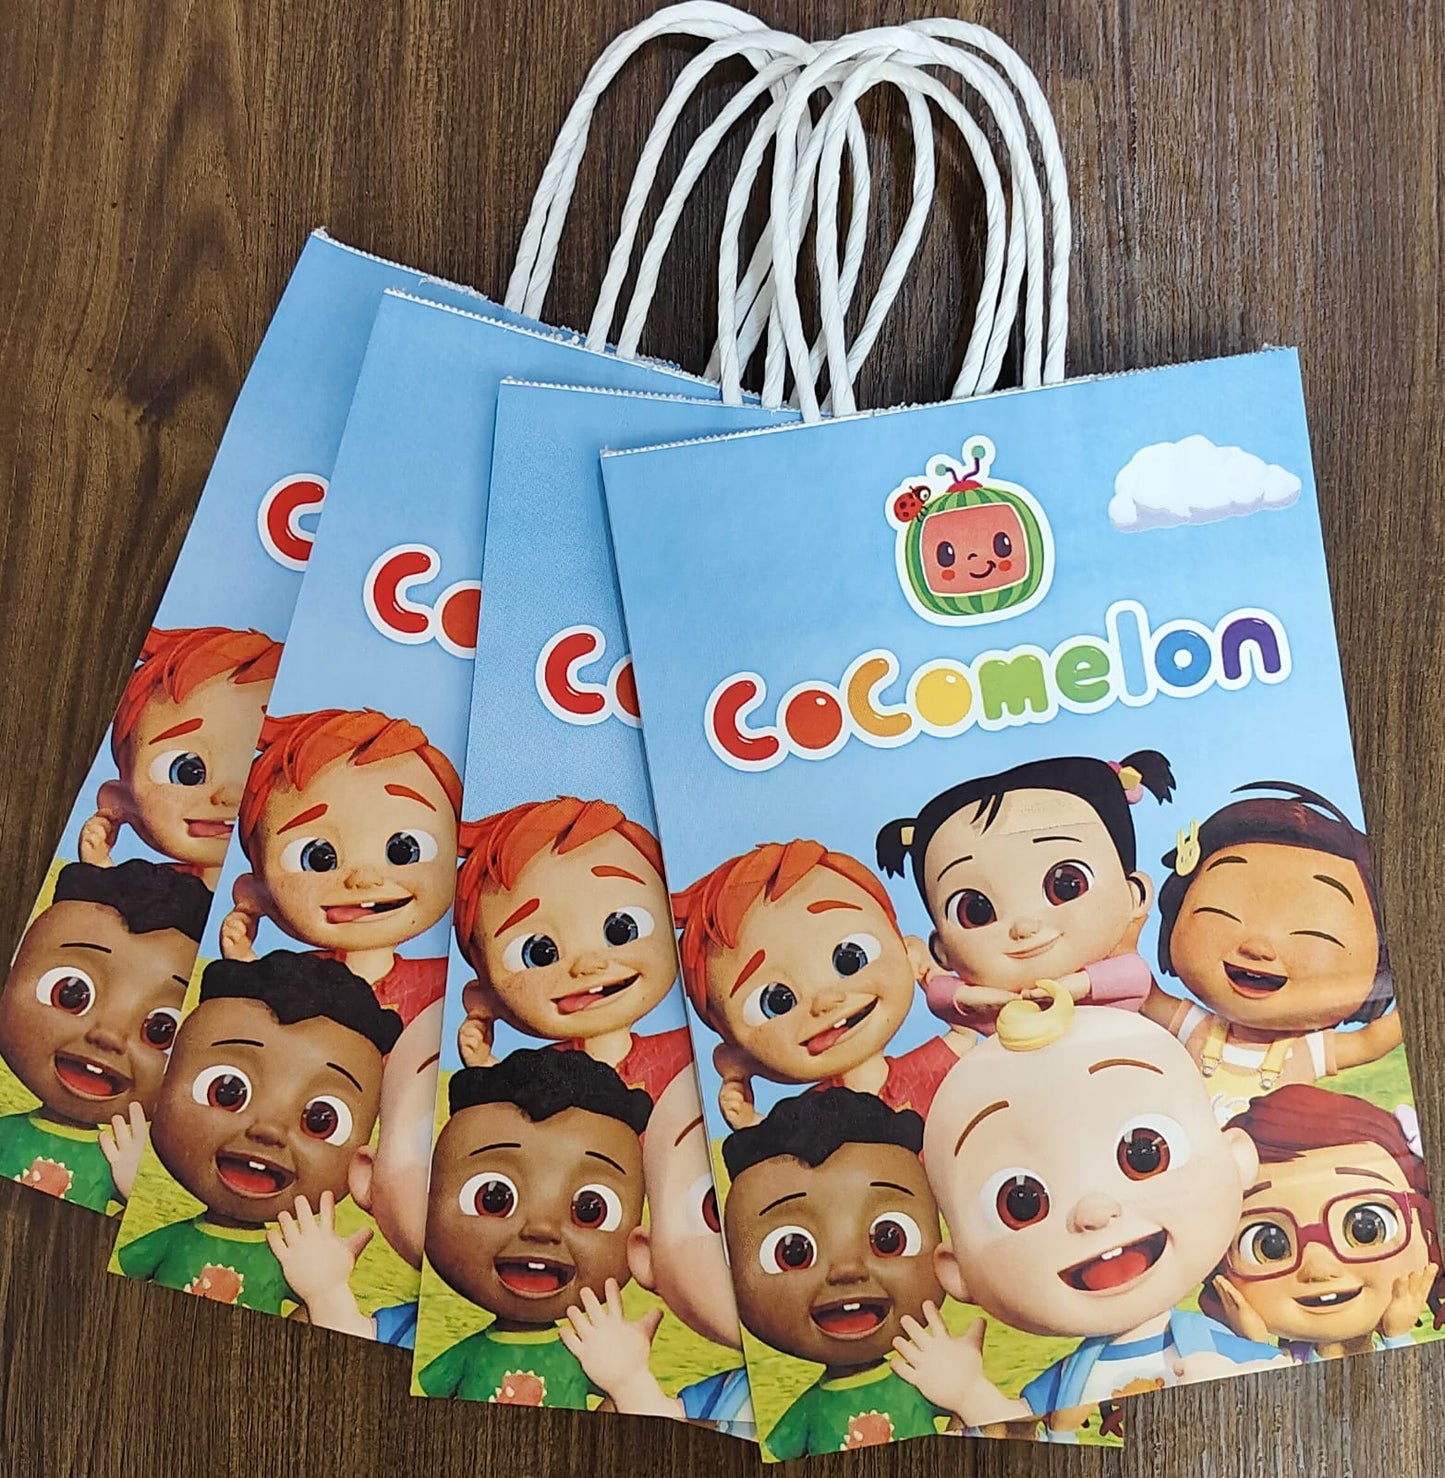 Cocomelon gift bag - pack of 6